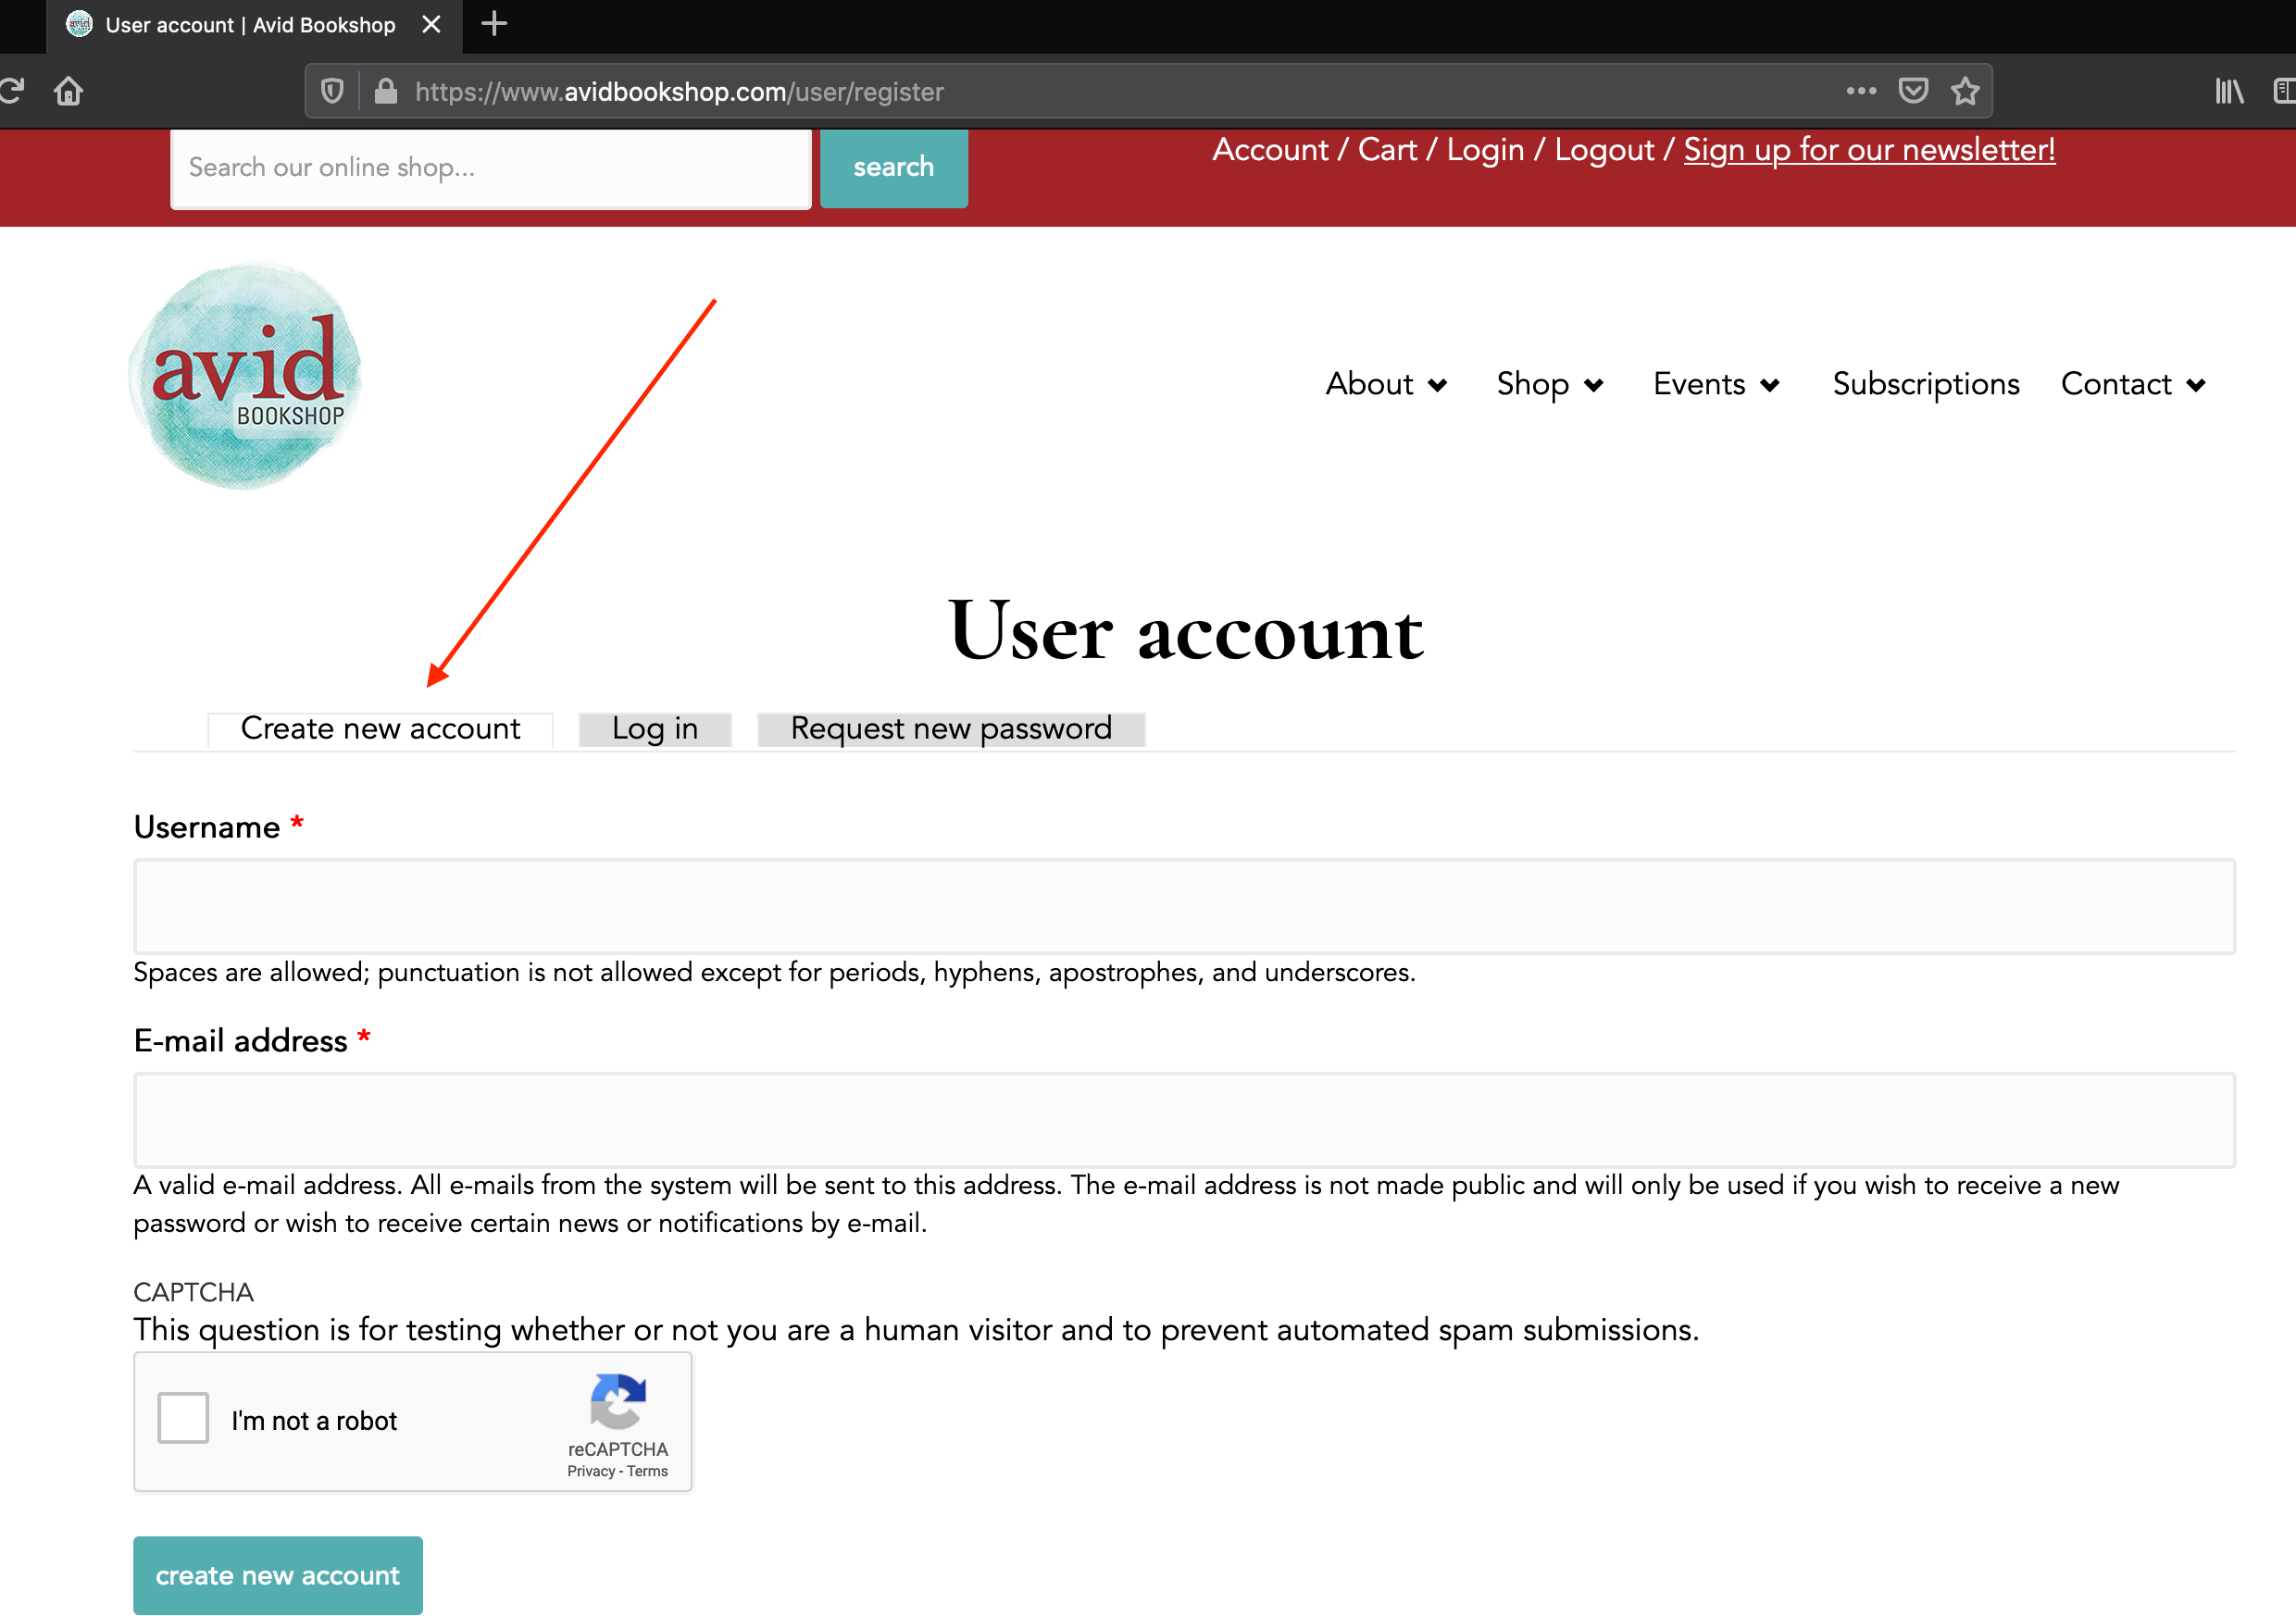 A screenshot of our website pointing to the "Create new account" tab